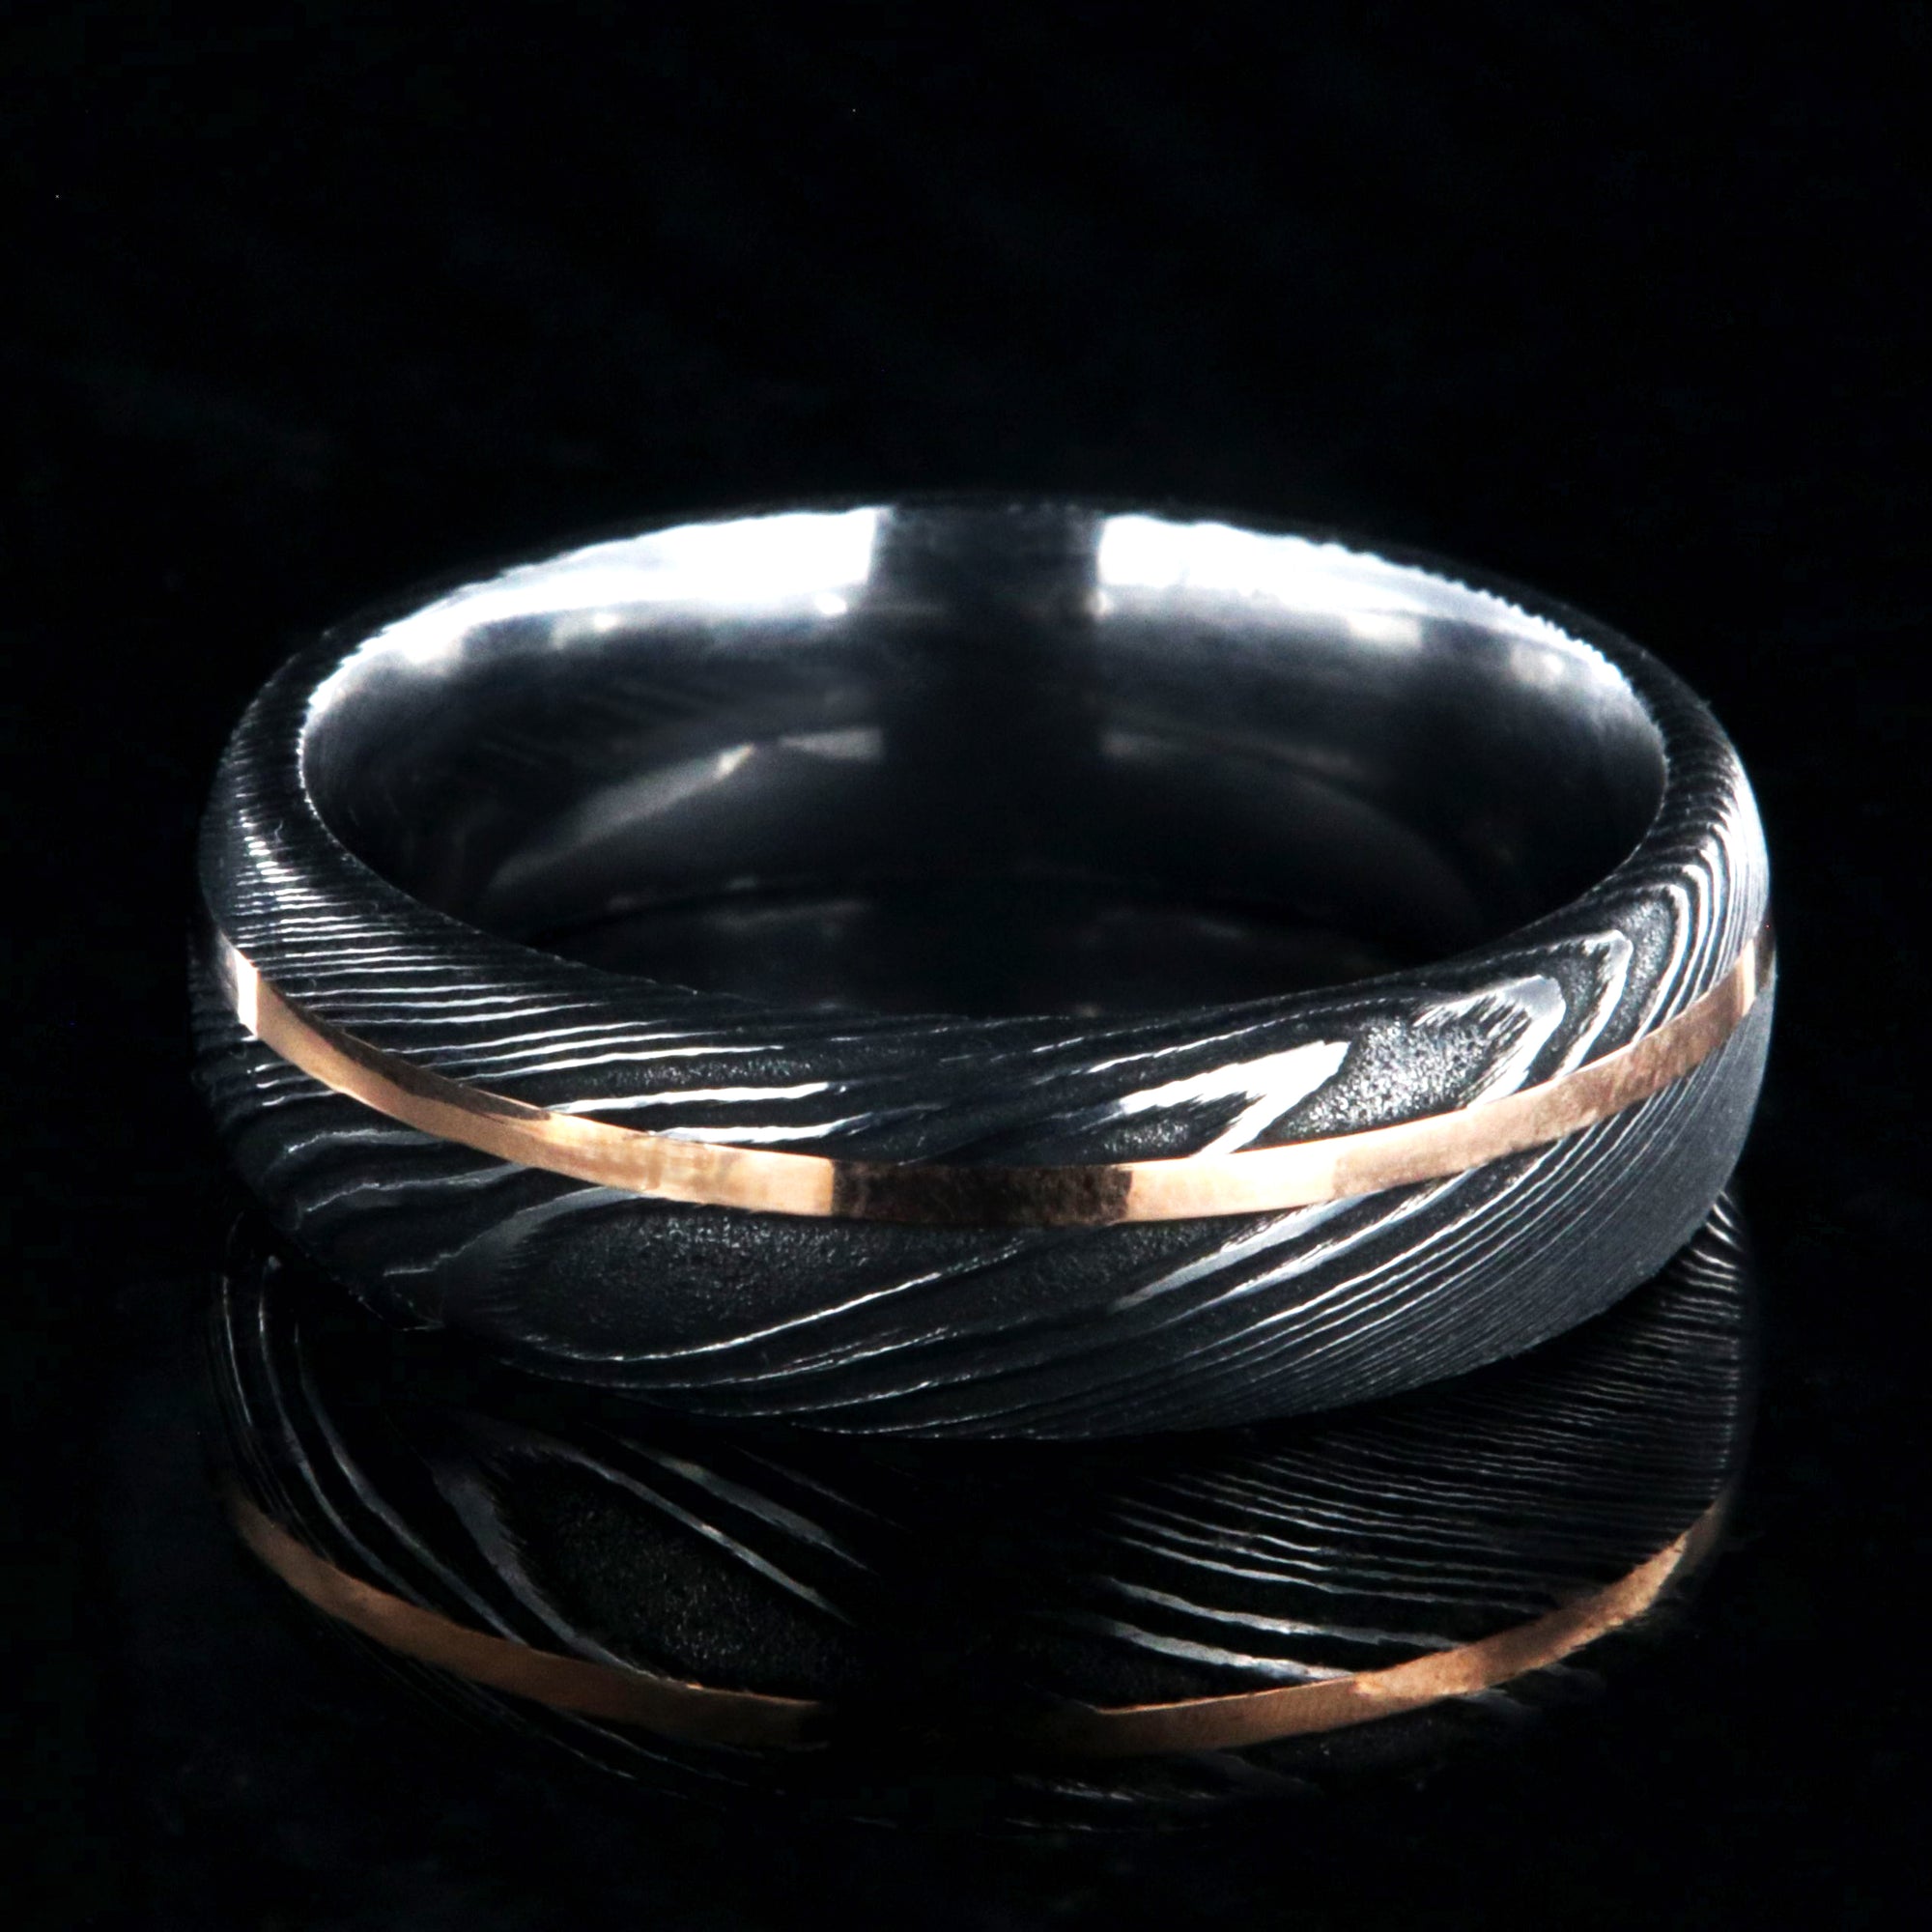 7mm wide black Damascus steel men's wedding ring with thin rose gold inlay